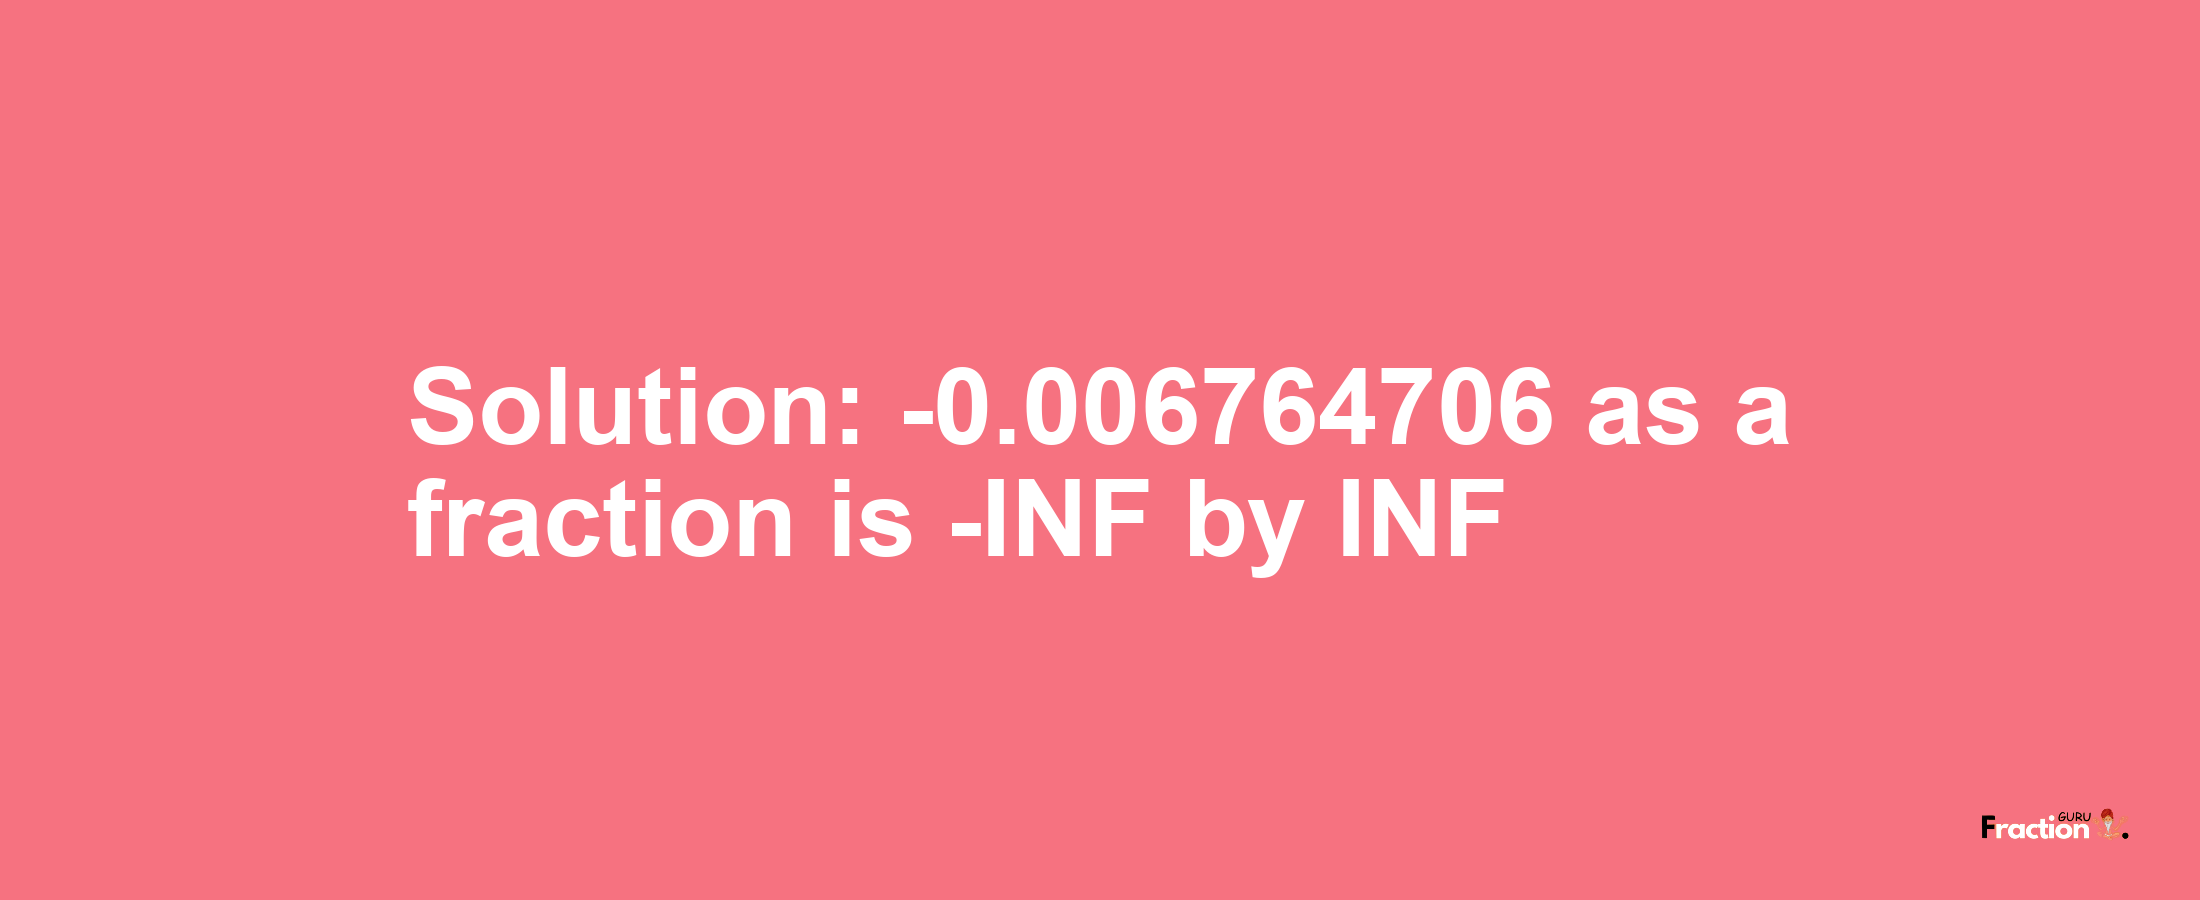 Solution:-0.006764706 as a fraction is -INF/INF